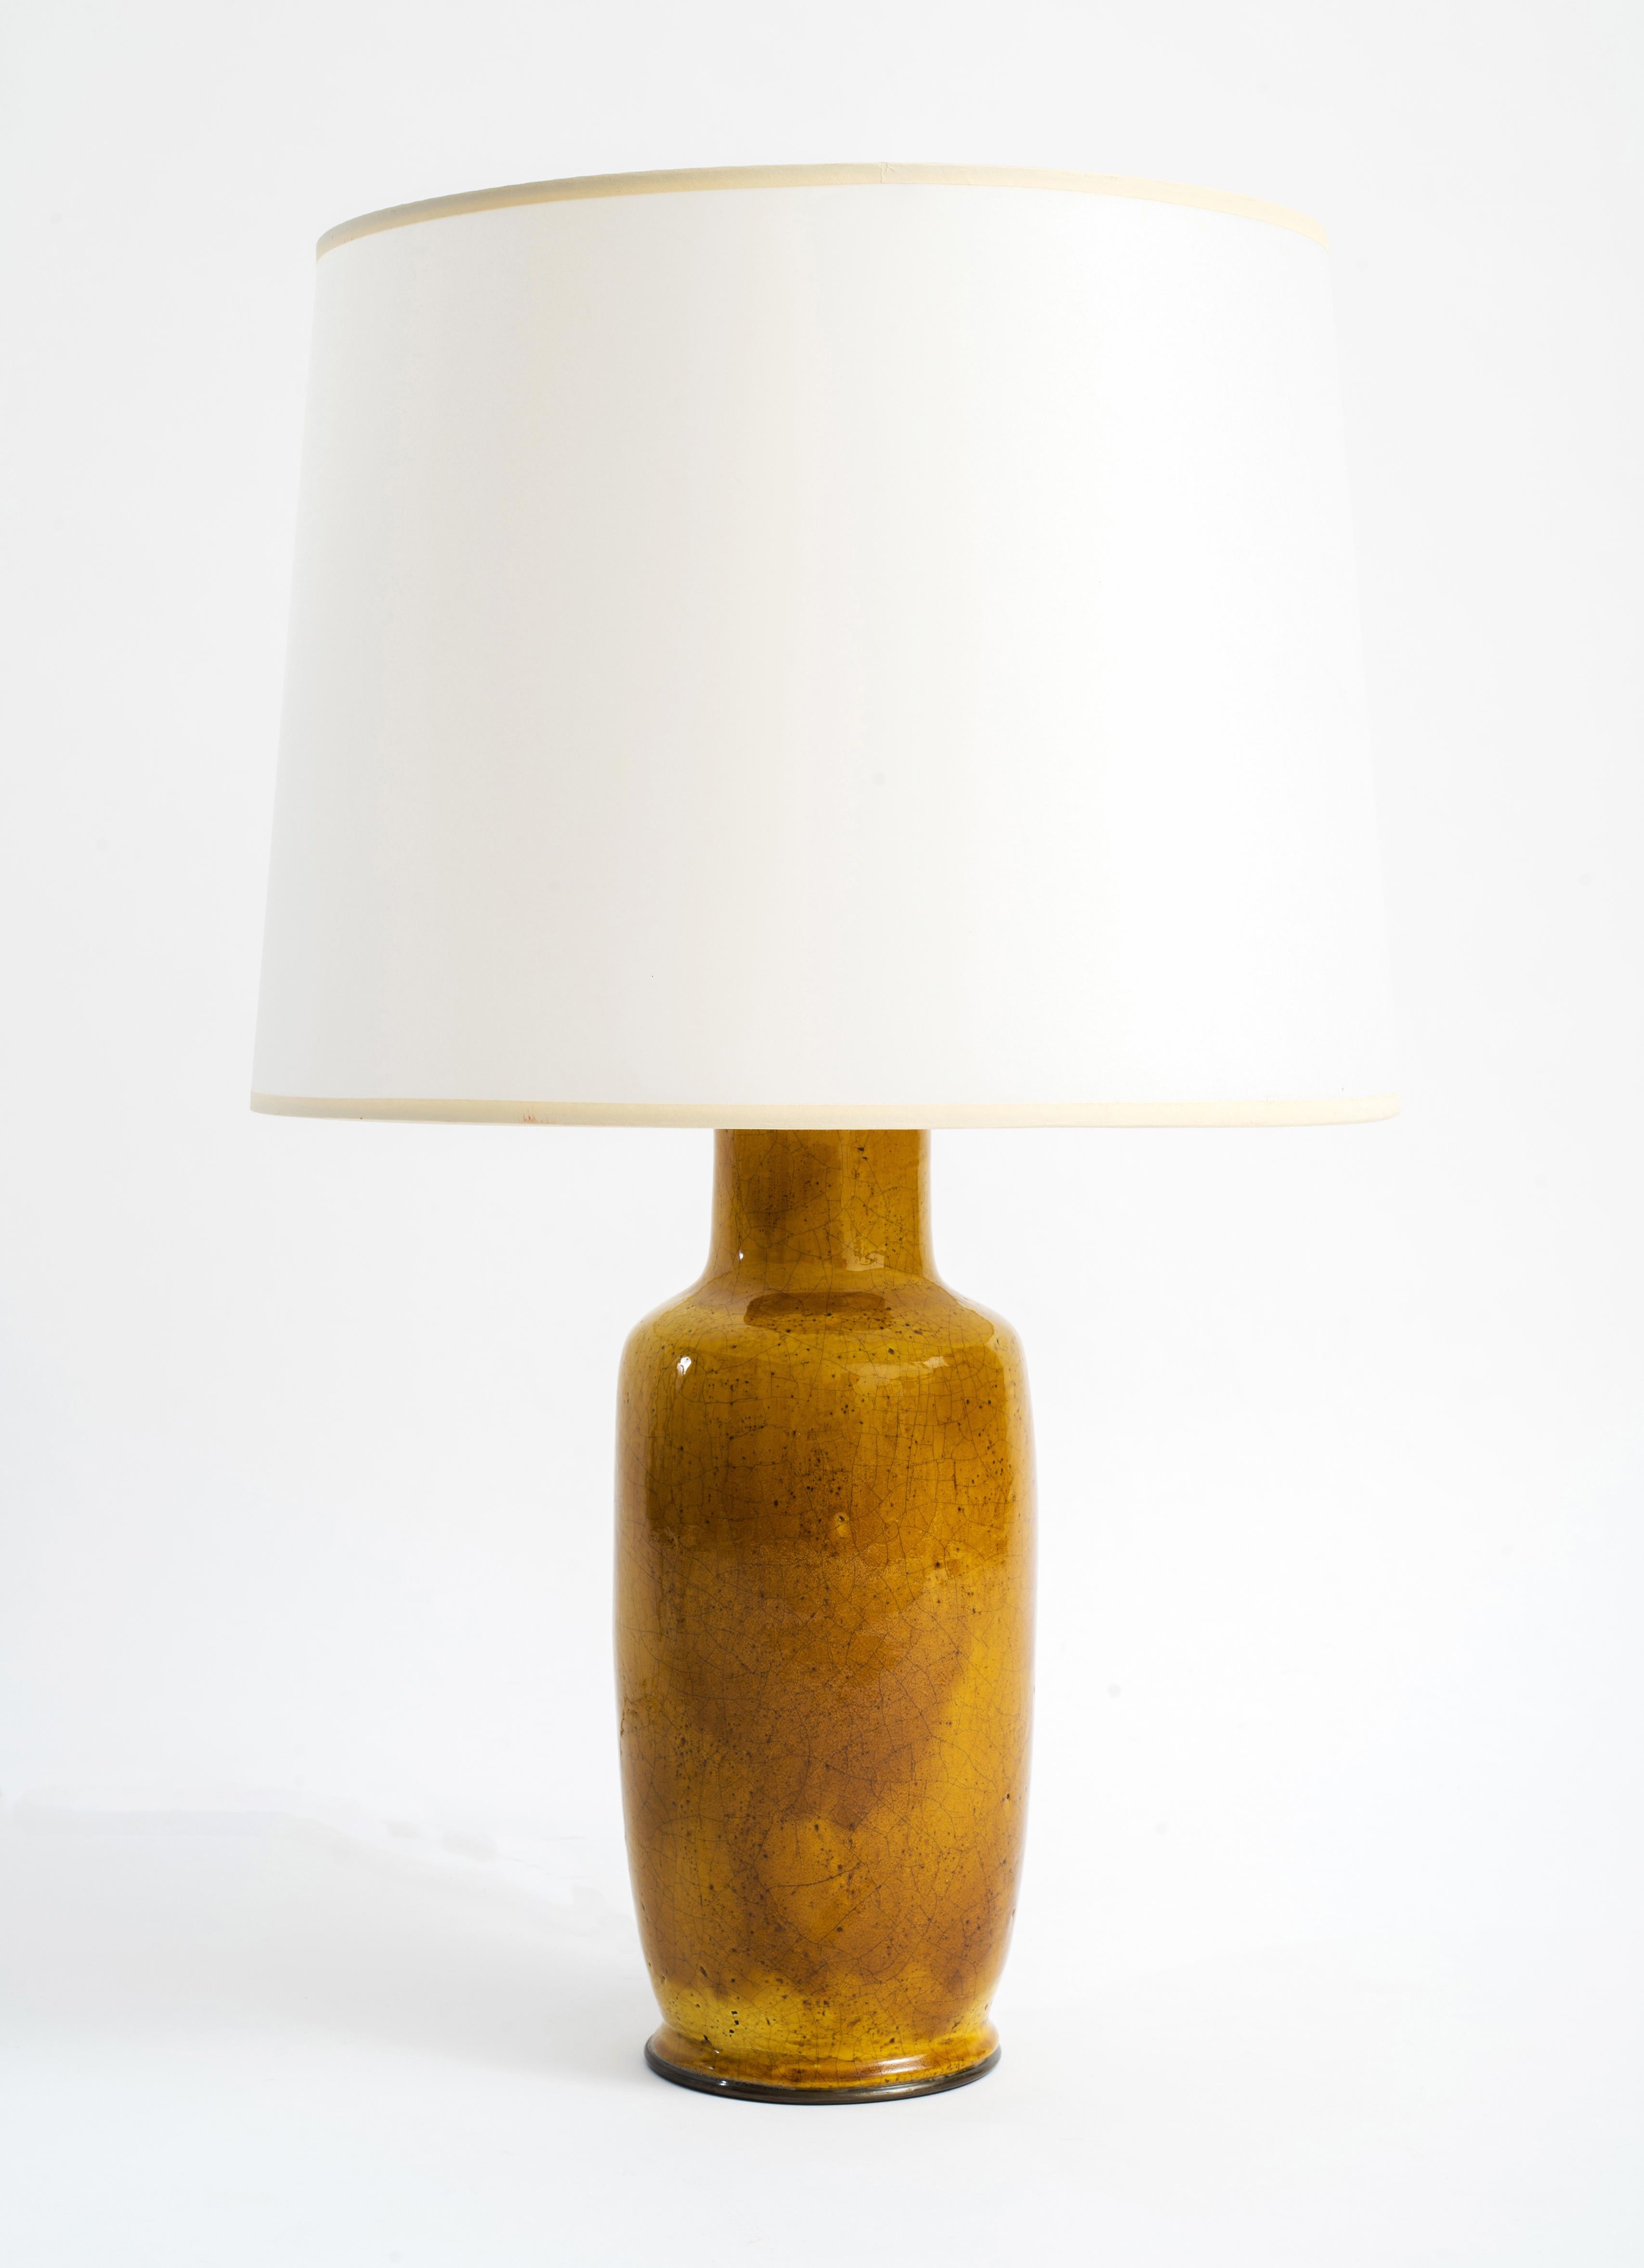 20th Century Modernist Ochre Glazed Ceramic Table Lamp with Patinated Brass Hardware, 1950s